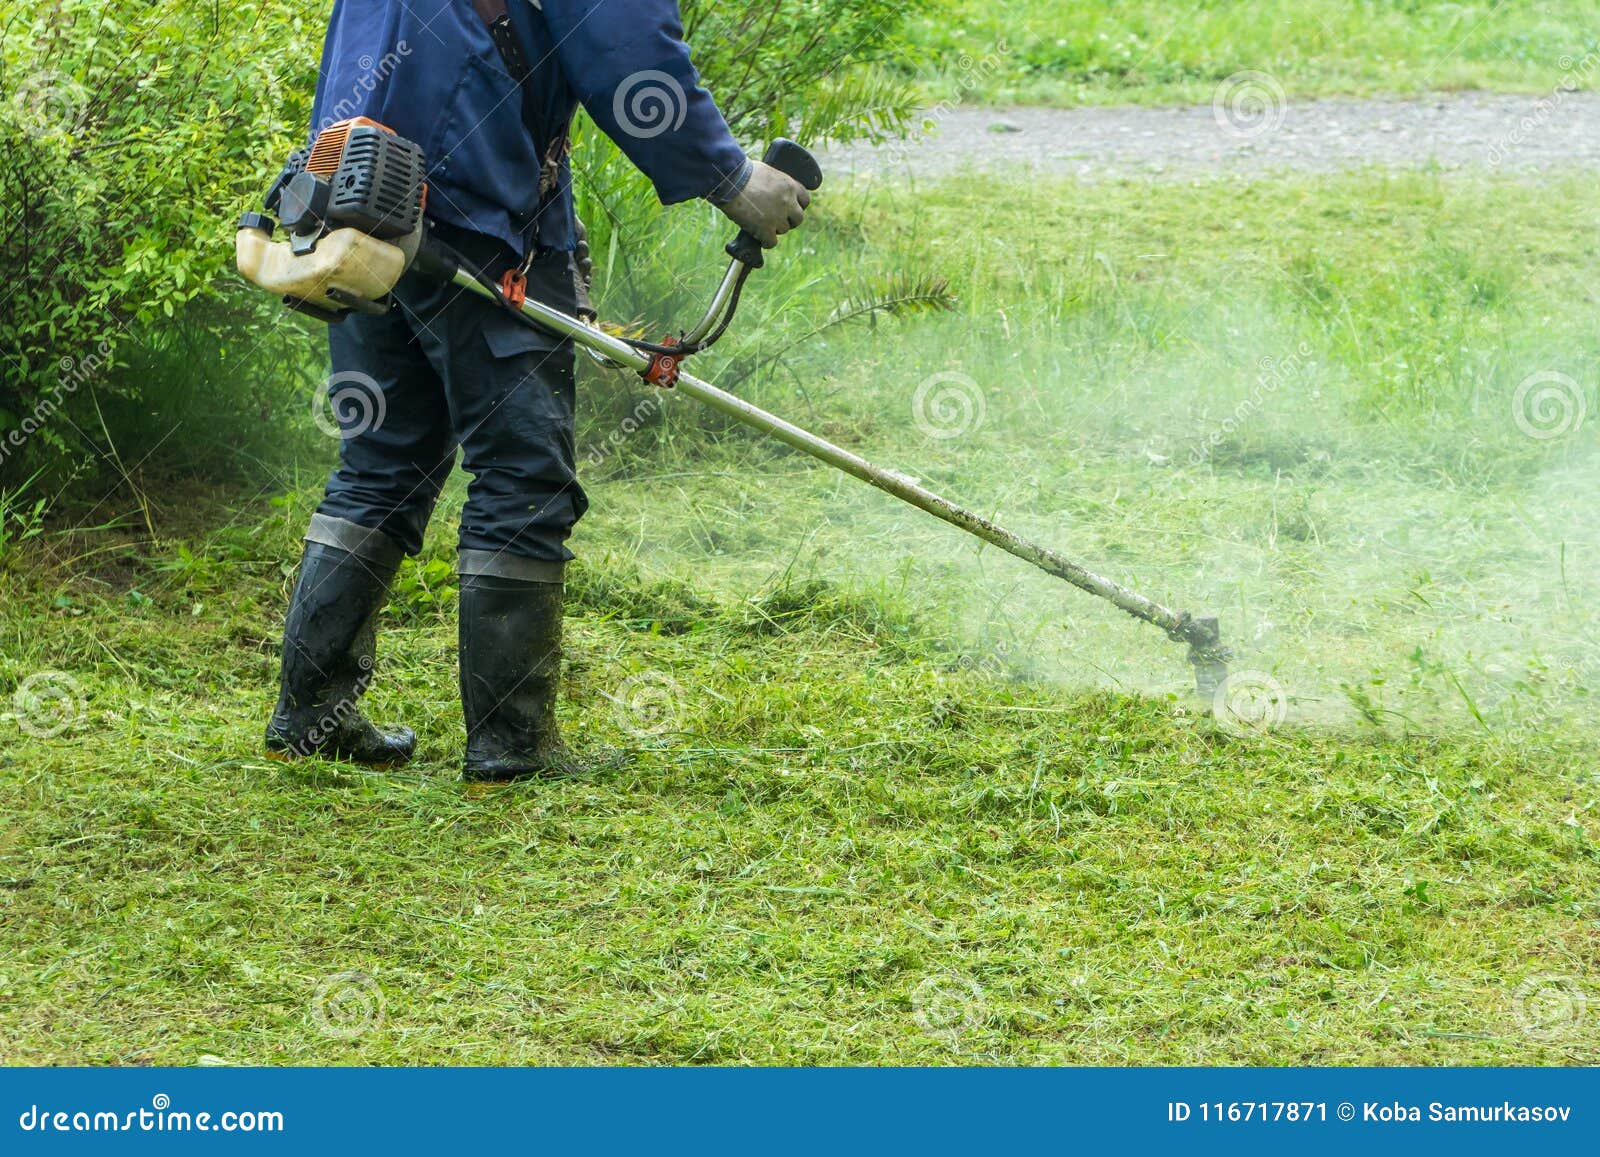 The Gardener Cutting Grass by Lawn Mower Stock Image - Image of work ...